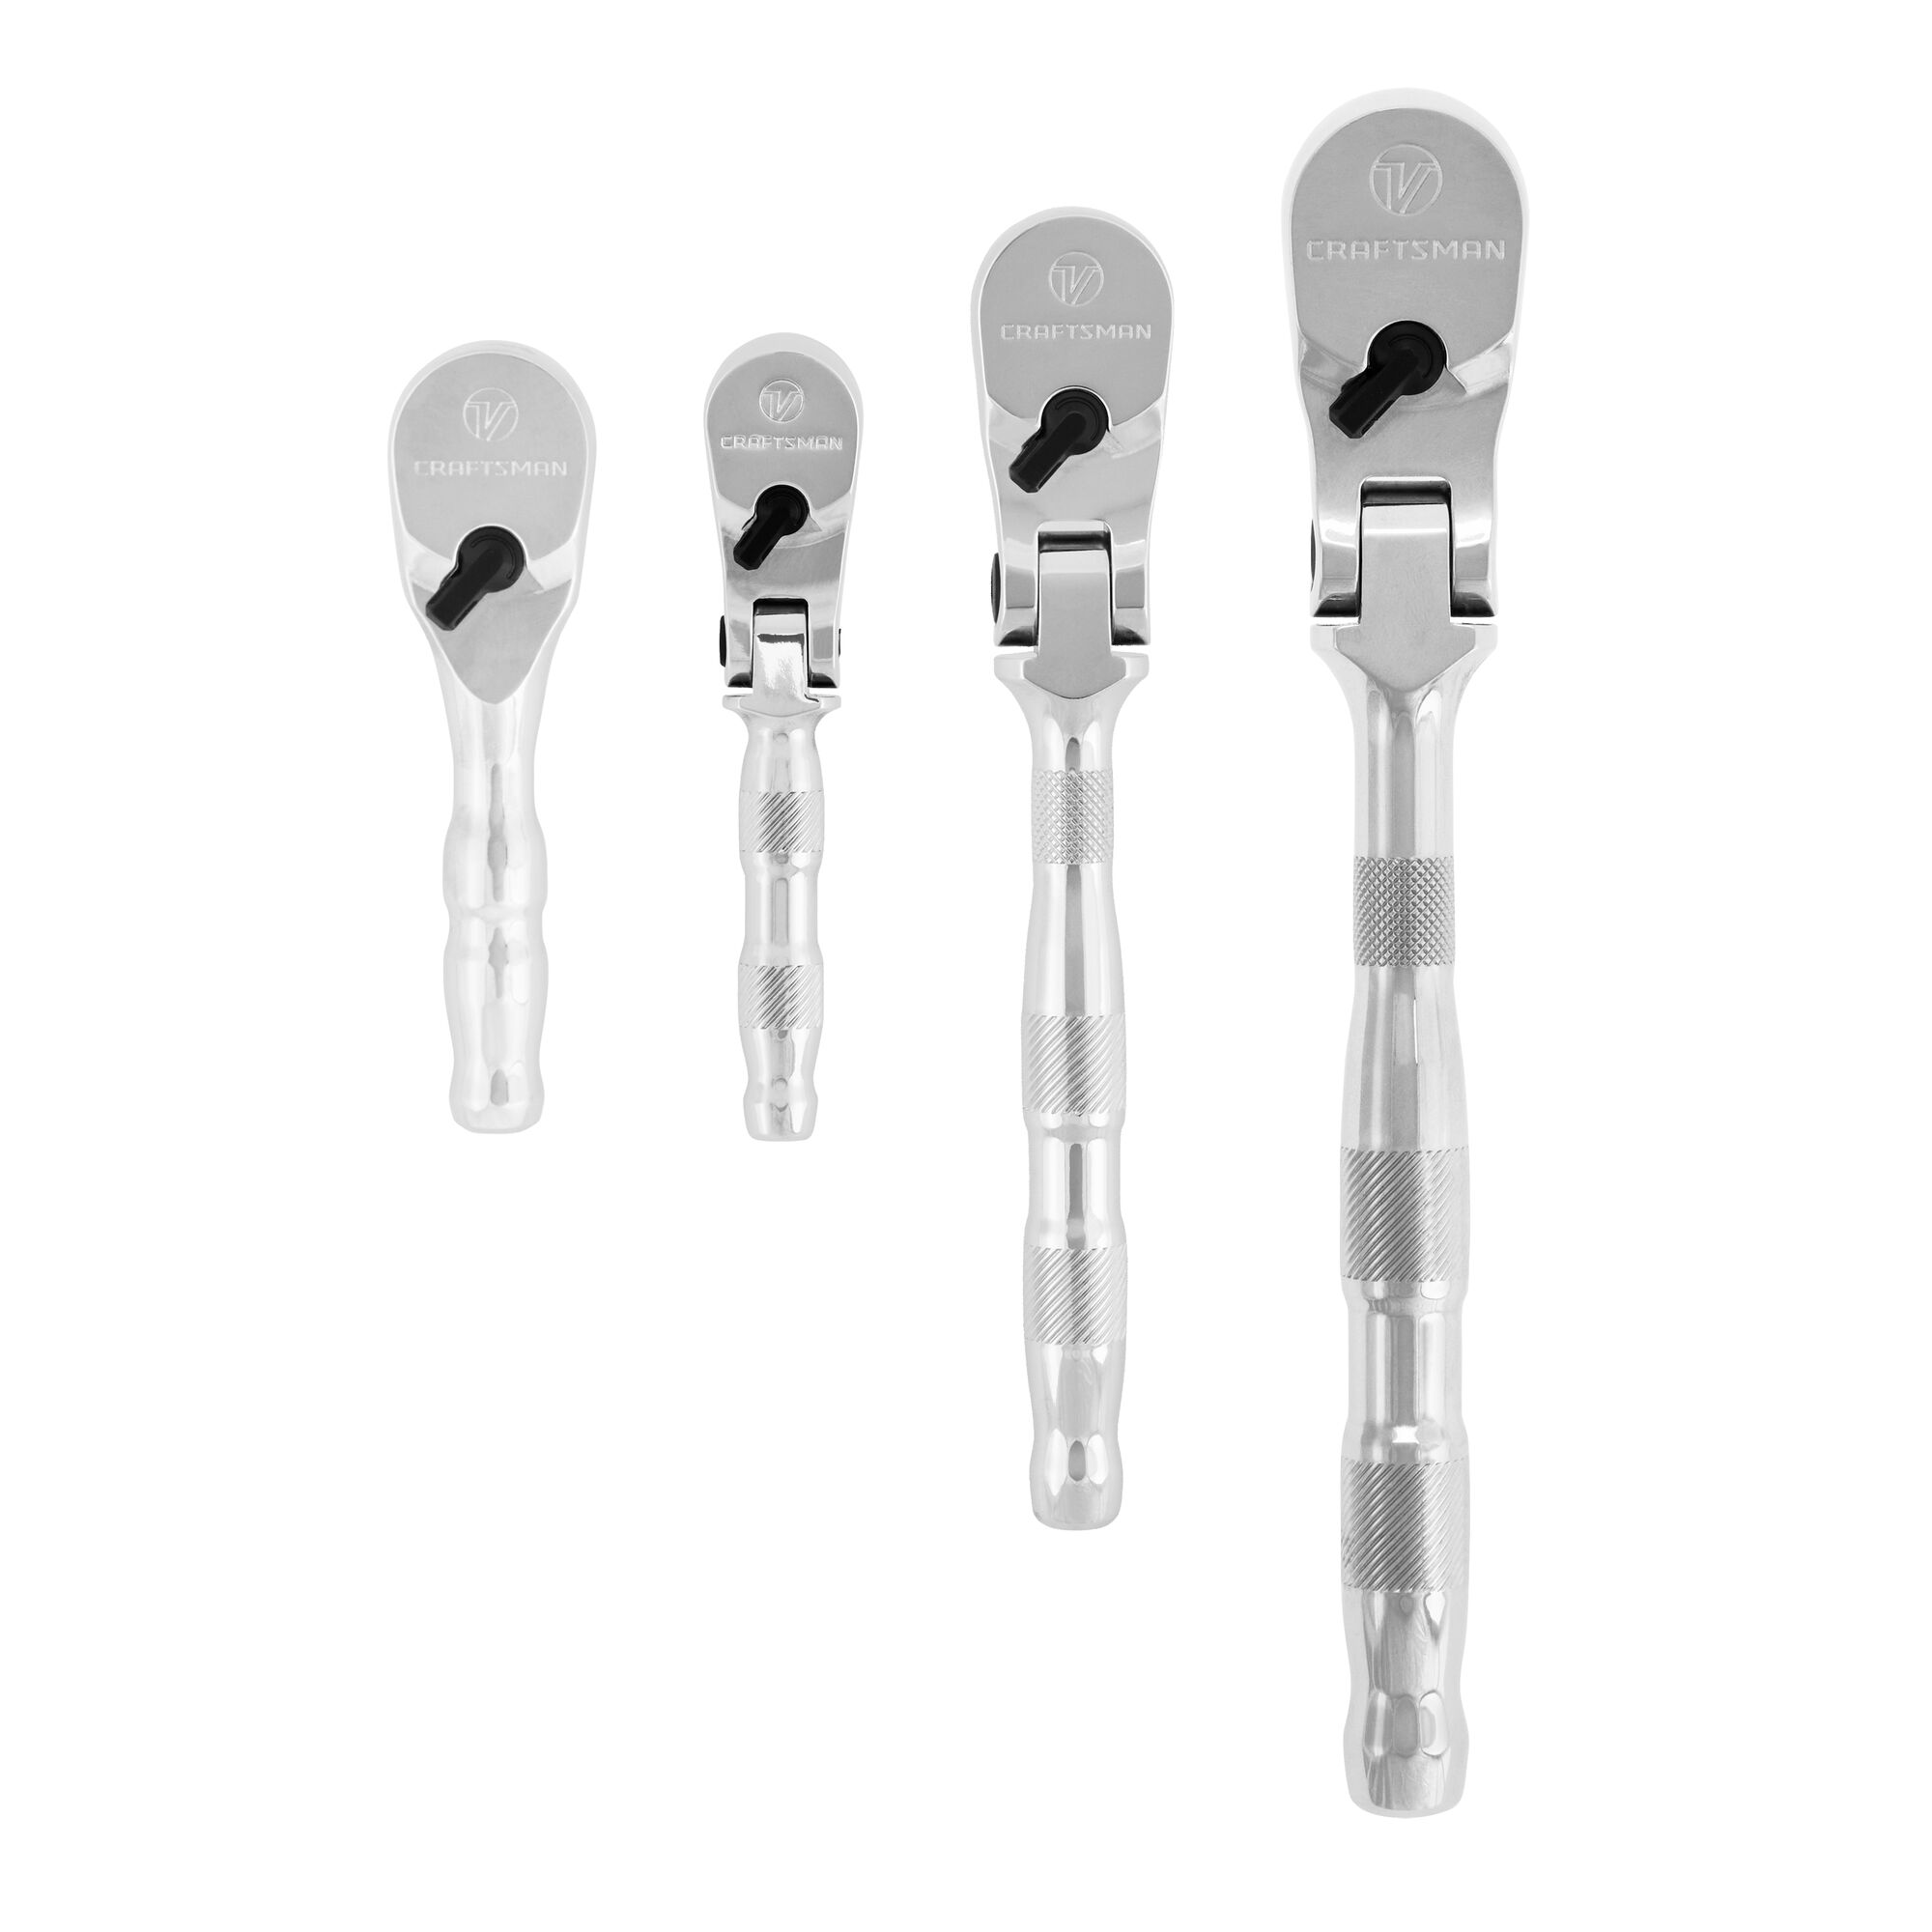 Profile of V series quarter inch three eighth inch and half inch drive ratchet set. 4 pack